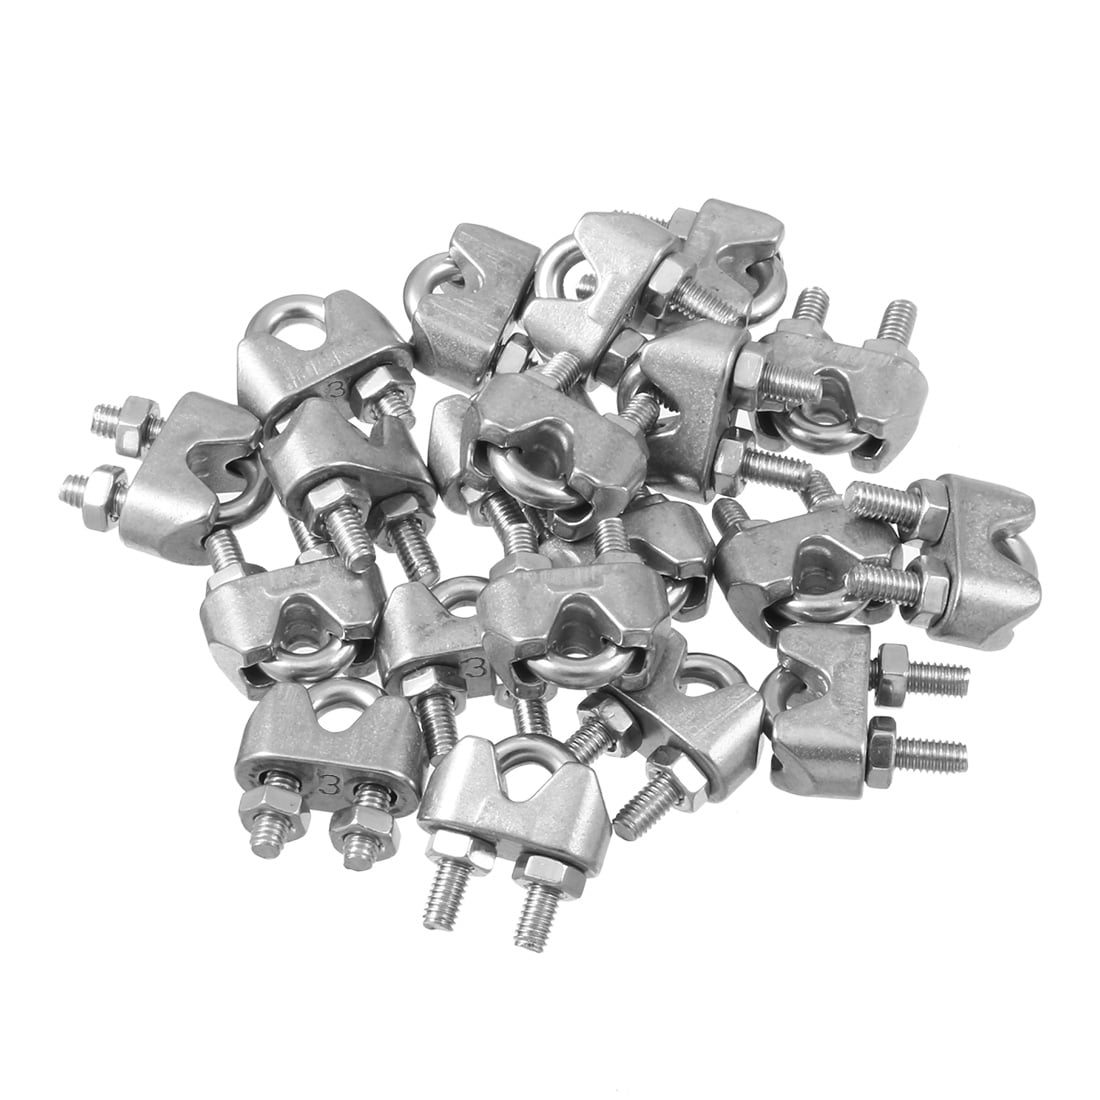 U Bolts With Saddle & Nuts 250 Pieces NEW,Wire Rope Clips 1/8" Zinc Plated 